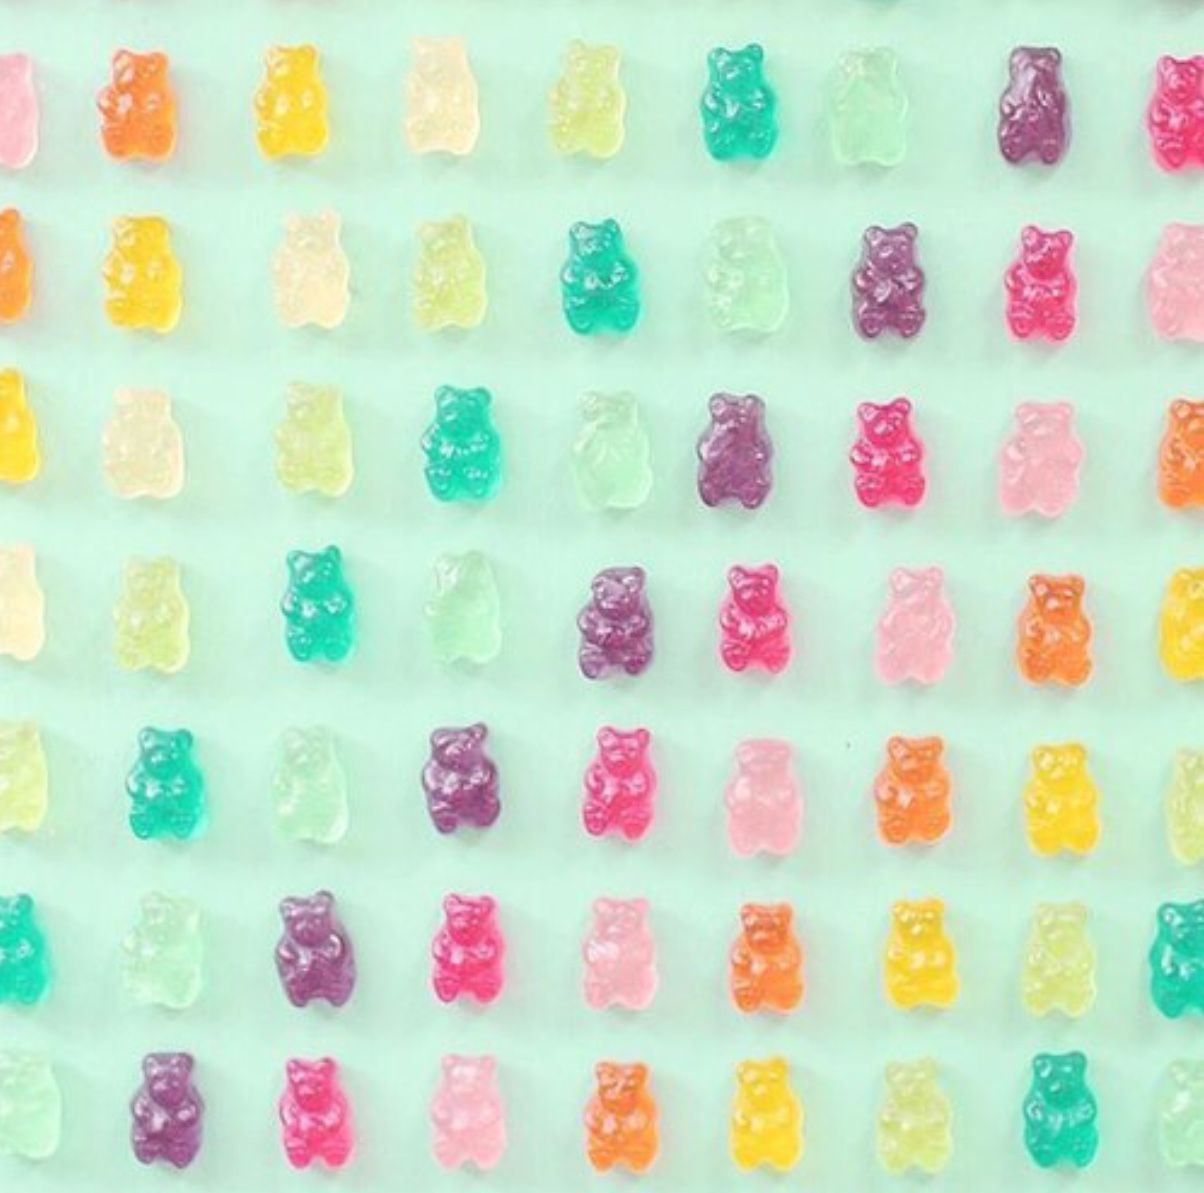 Gummy bears lined up on a blue background - Candy